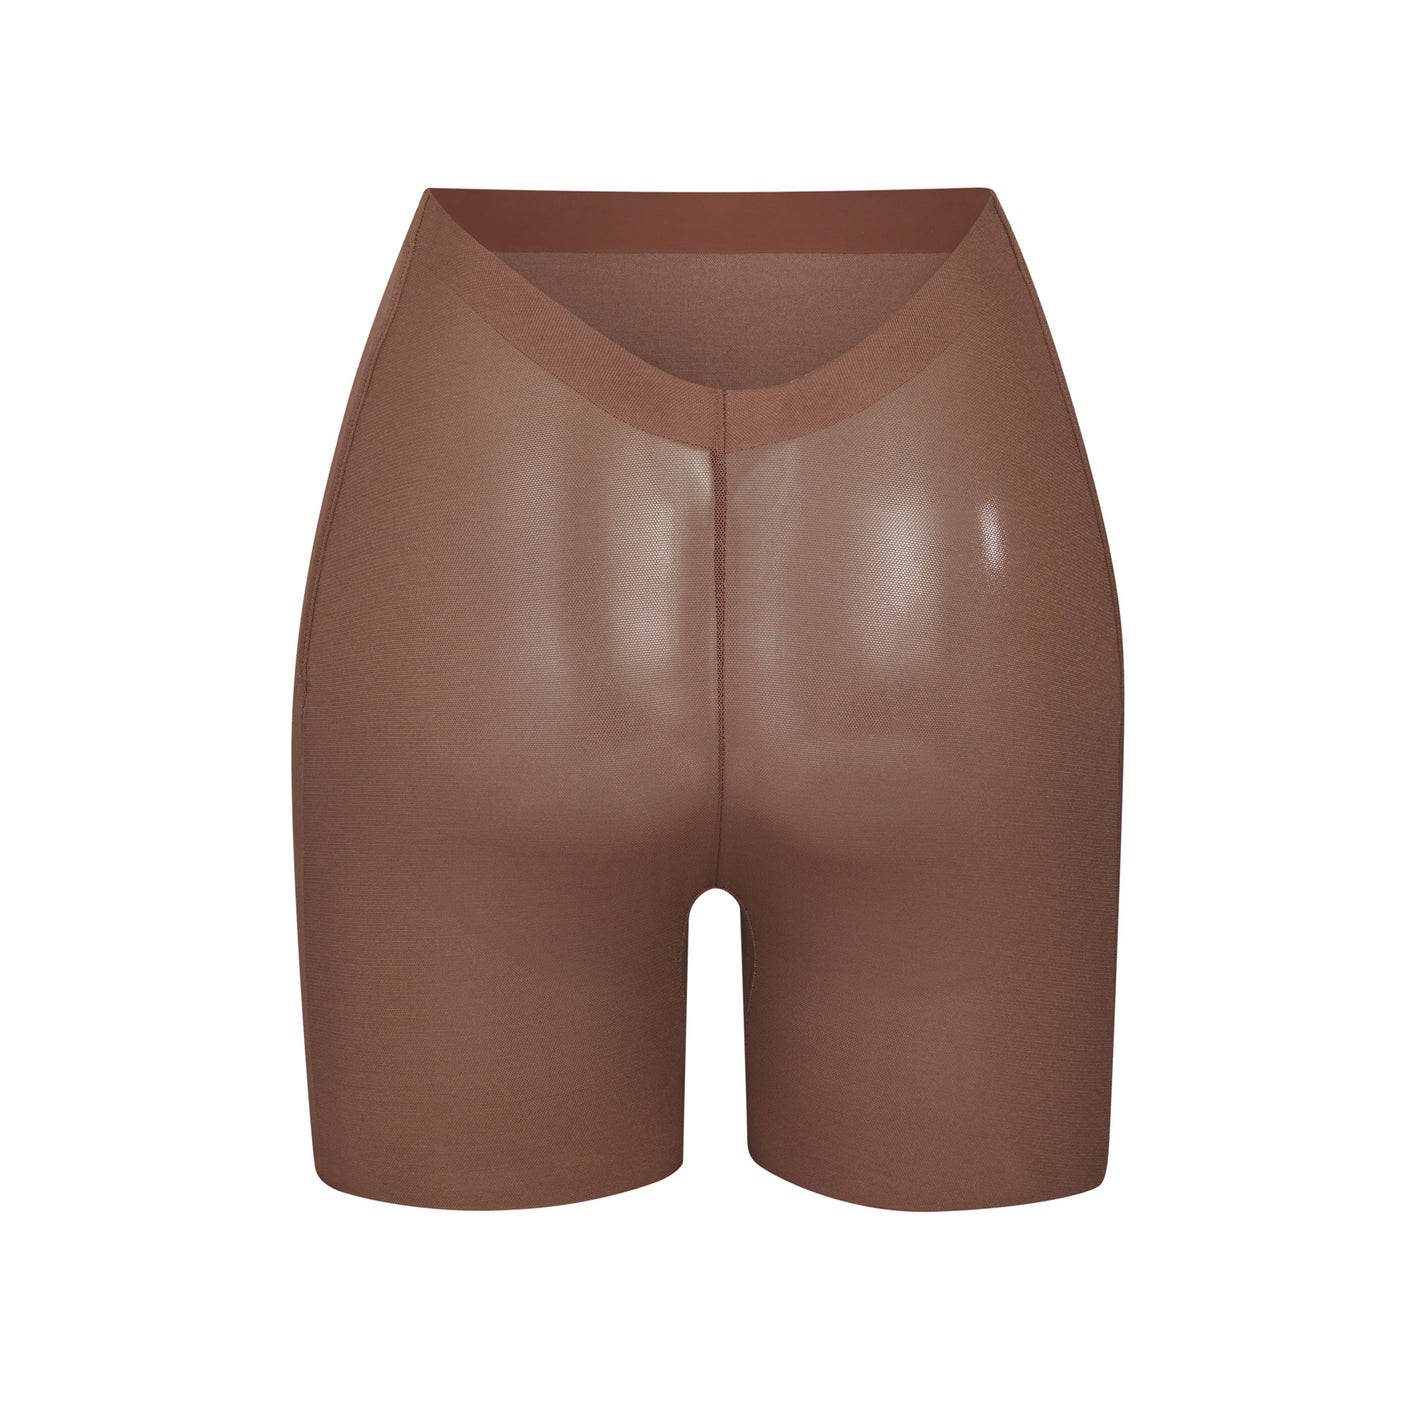 Latex Briefs Mid-Waist Tight Shorts for Women Rubber Package Buttocks Pants